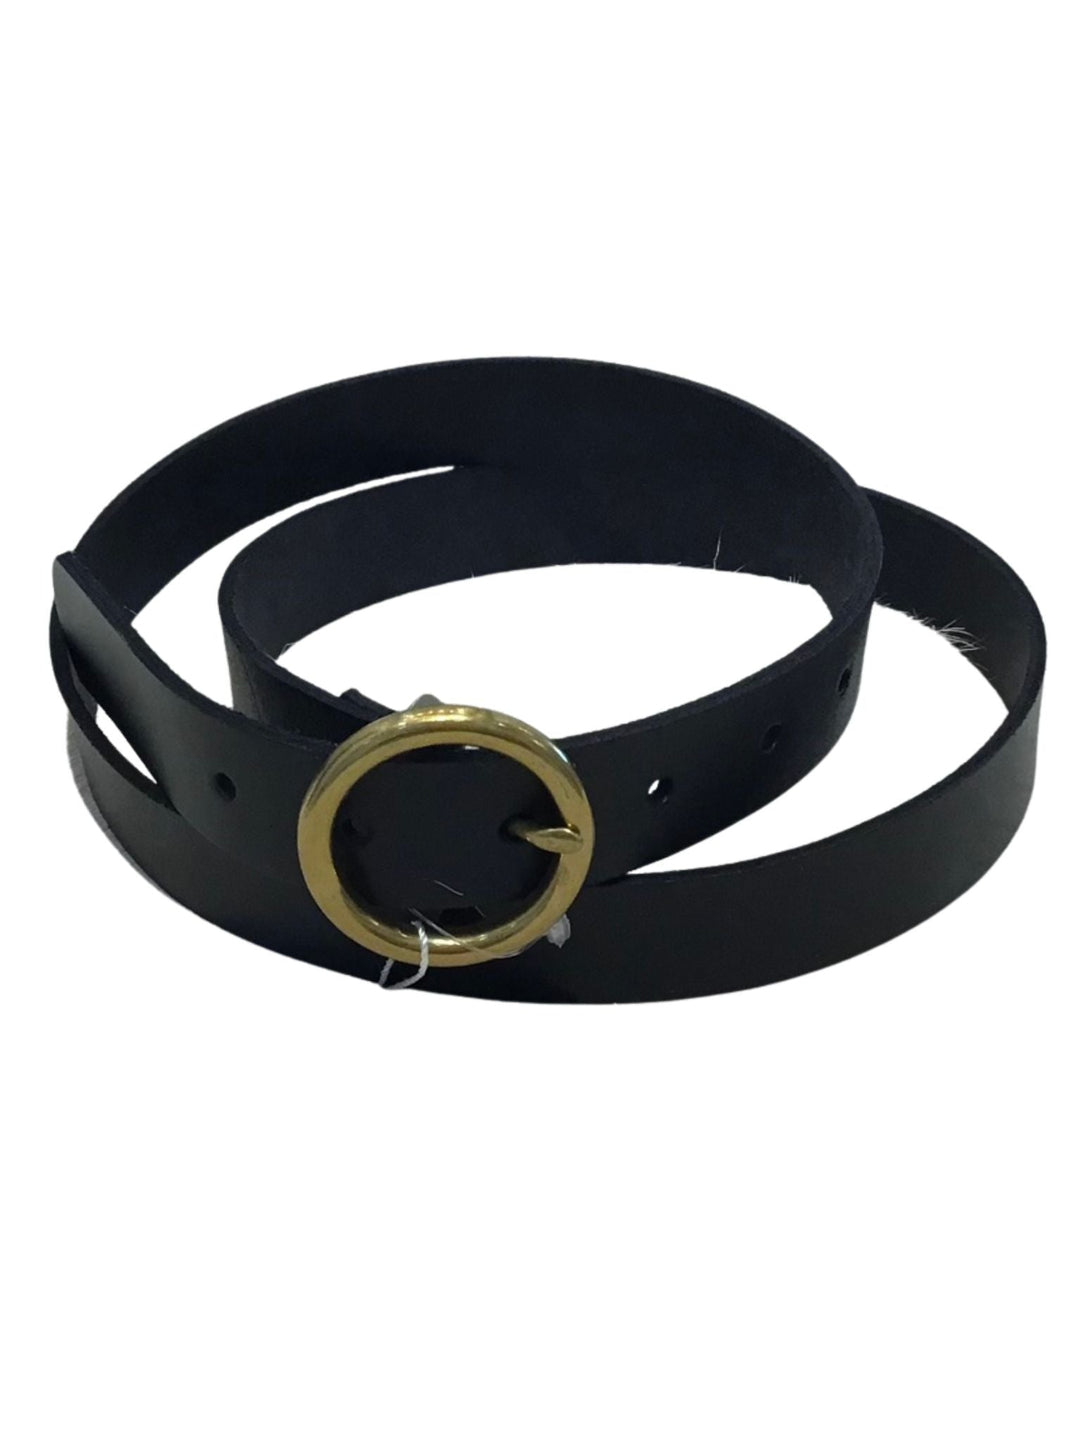 Most Wanted USA-Brass Toned Circle Buckle Belt - Leela and Lavender